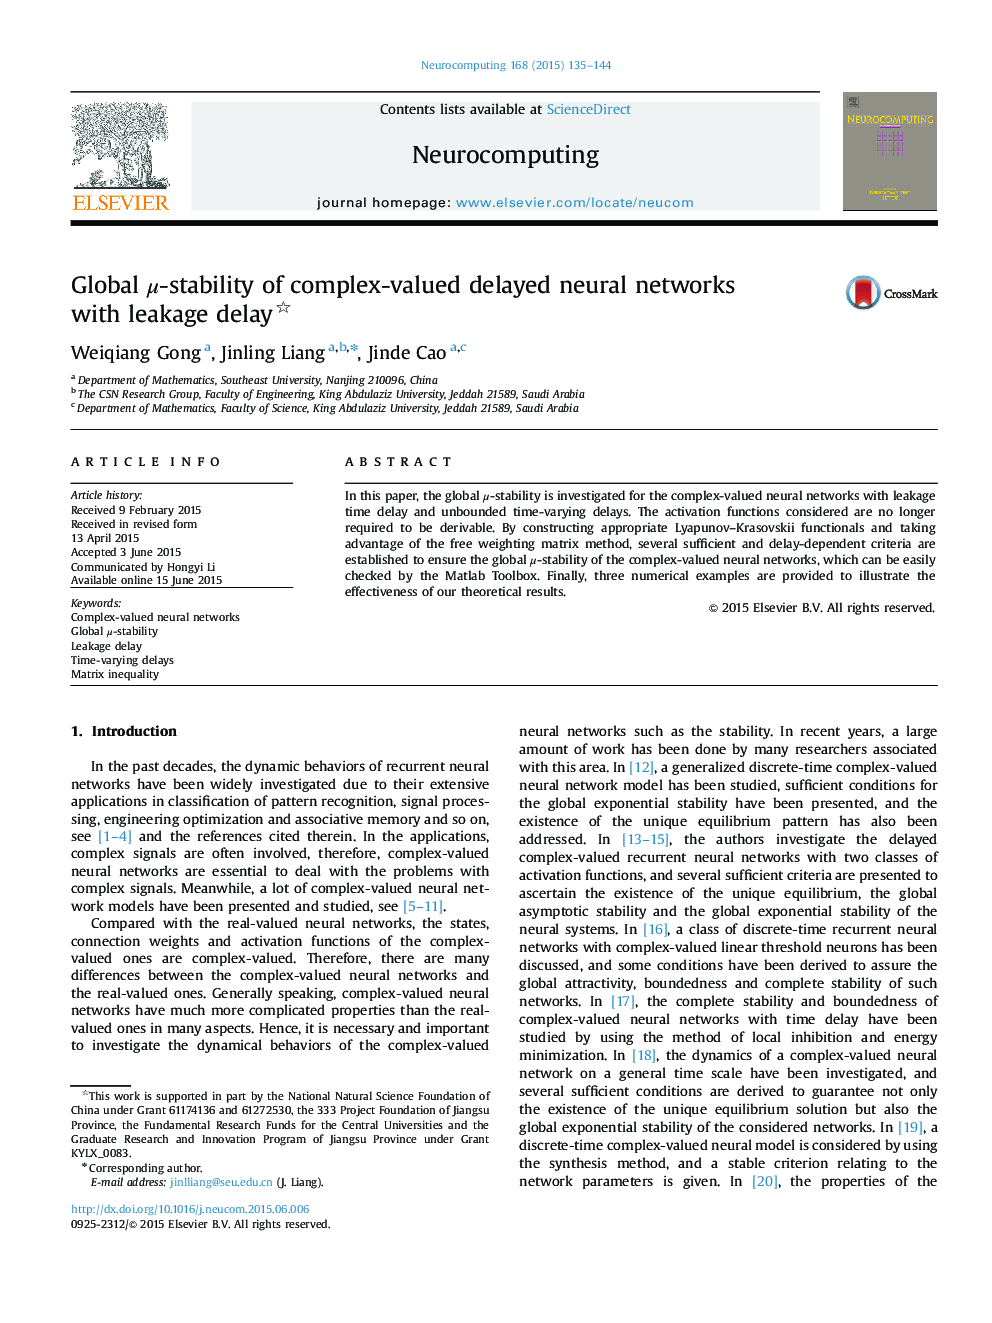 Global μ-stability of complex-valued delayed neural networks with leakage delay 